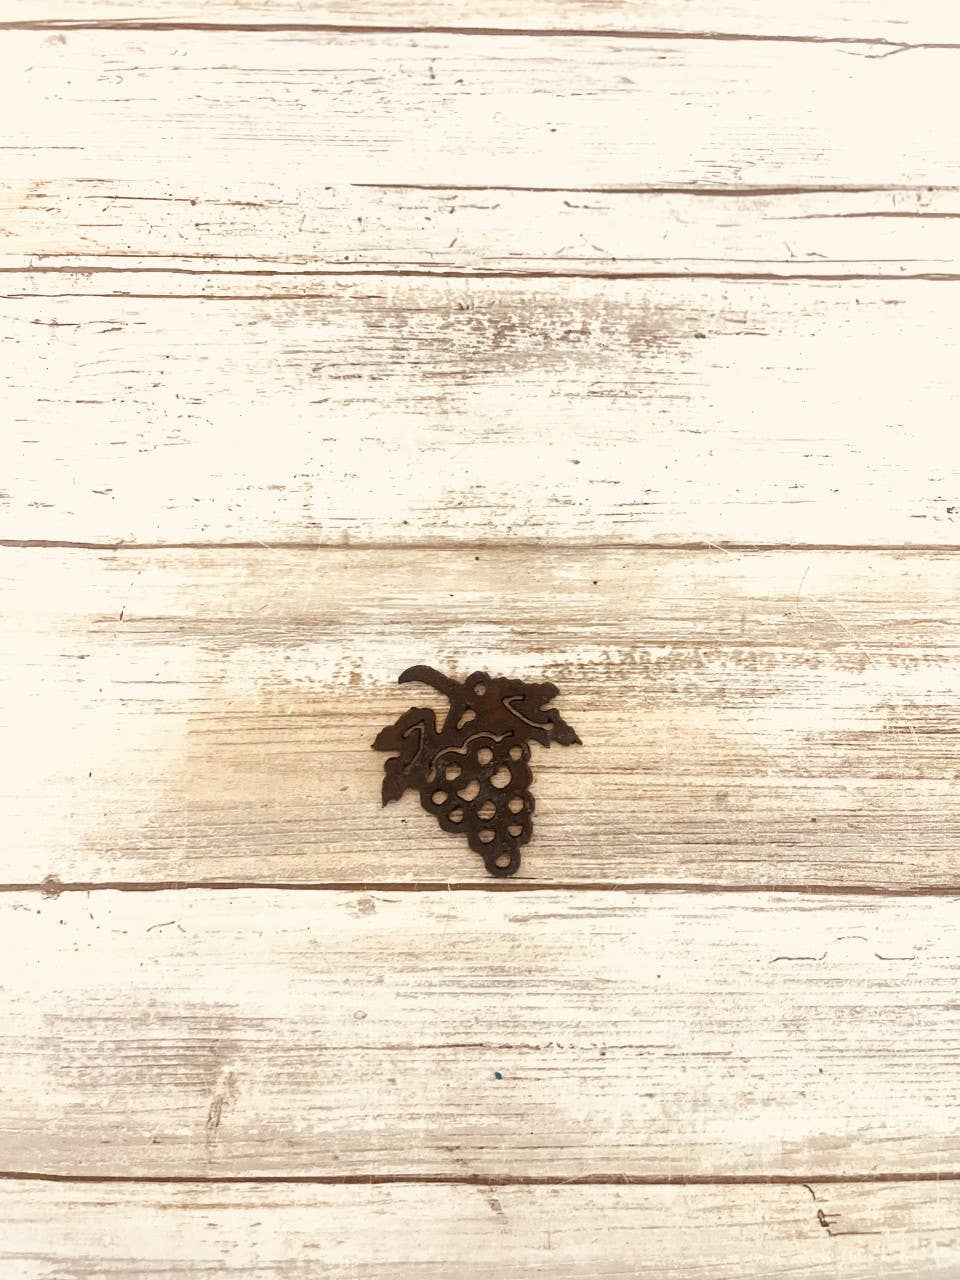 Grapes Charm Rustic Wine Lover Gift Pendant DIY